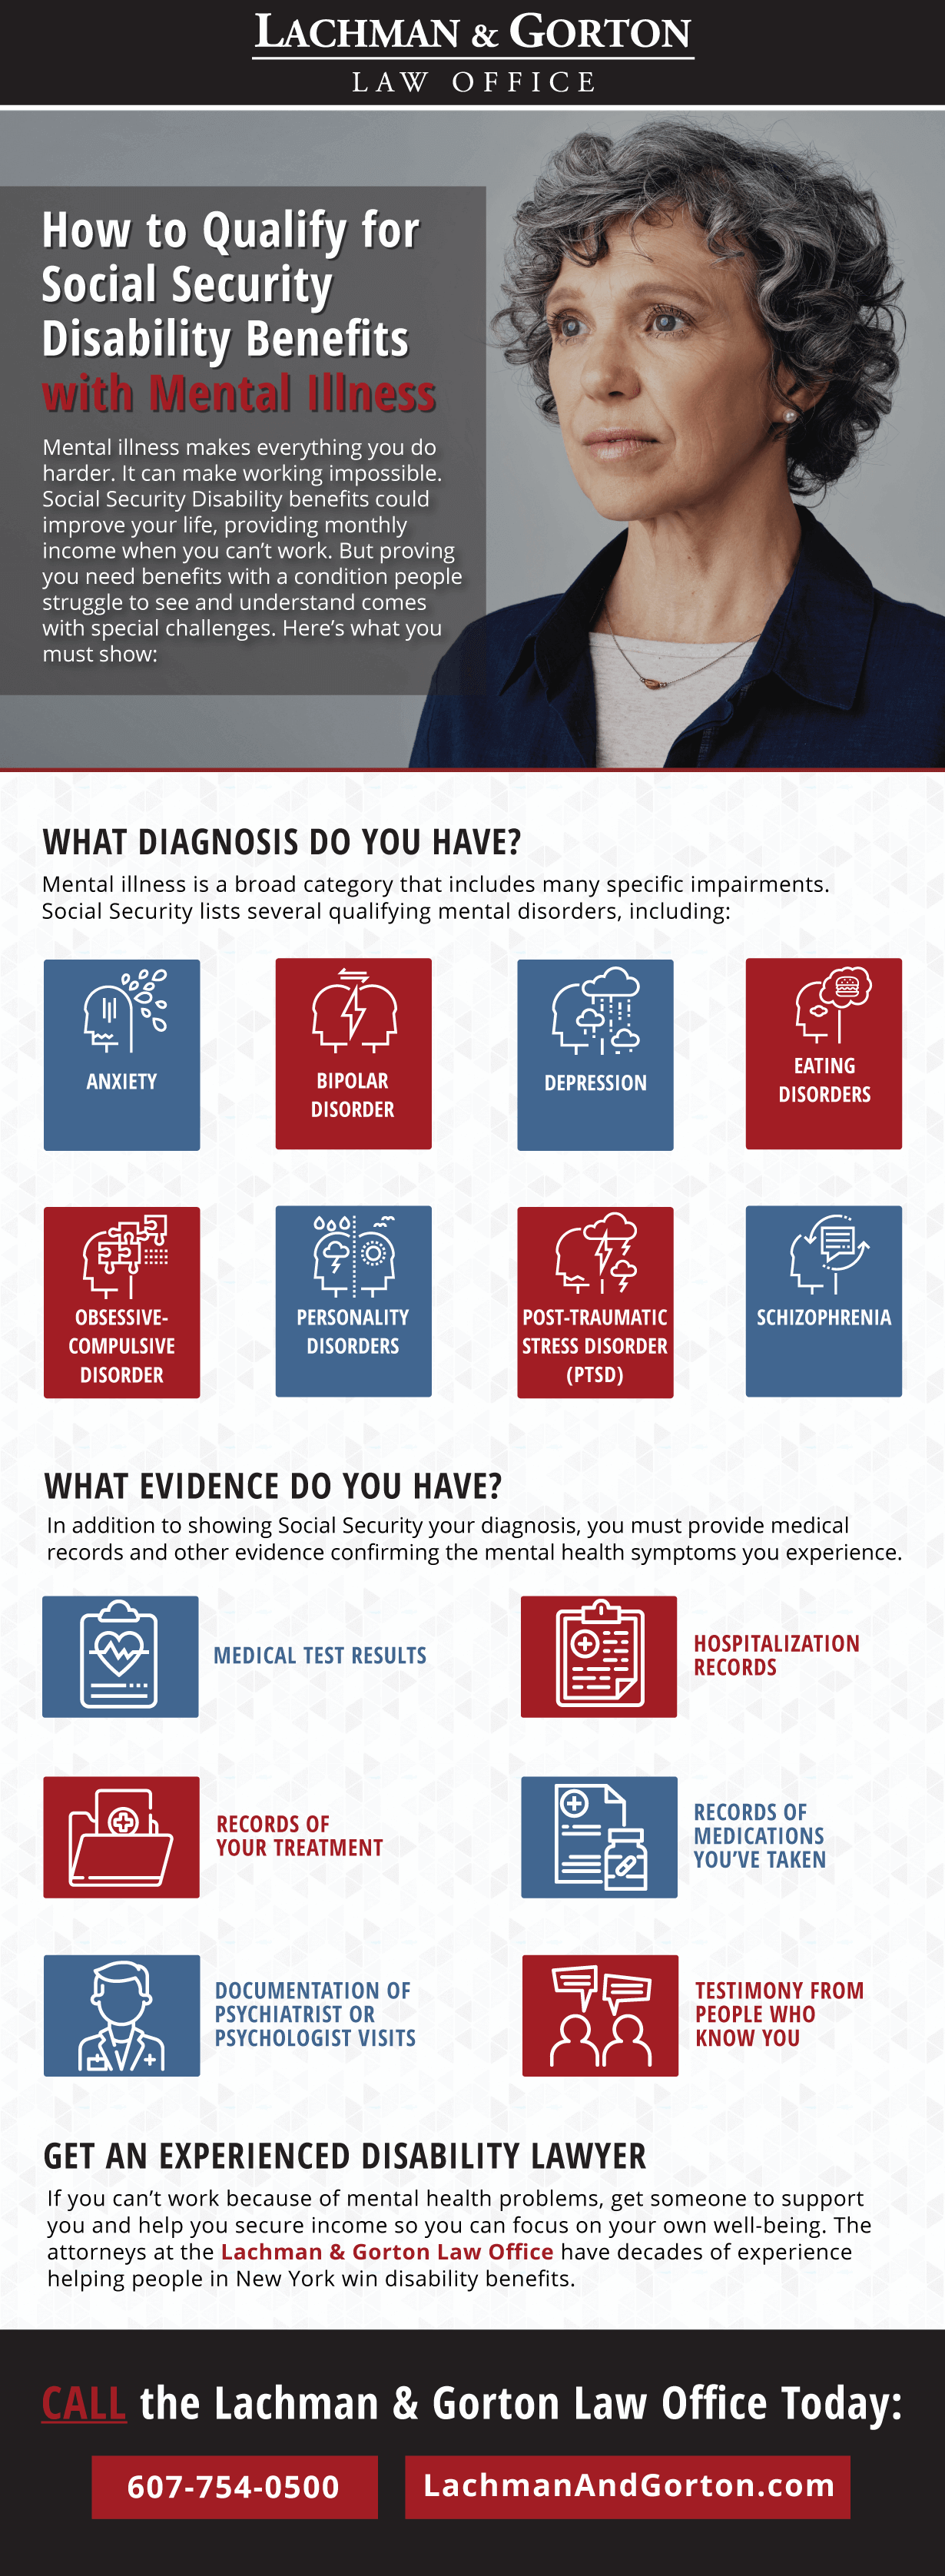 An infographic about how to qualify for SSD benefits with mental illness.